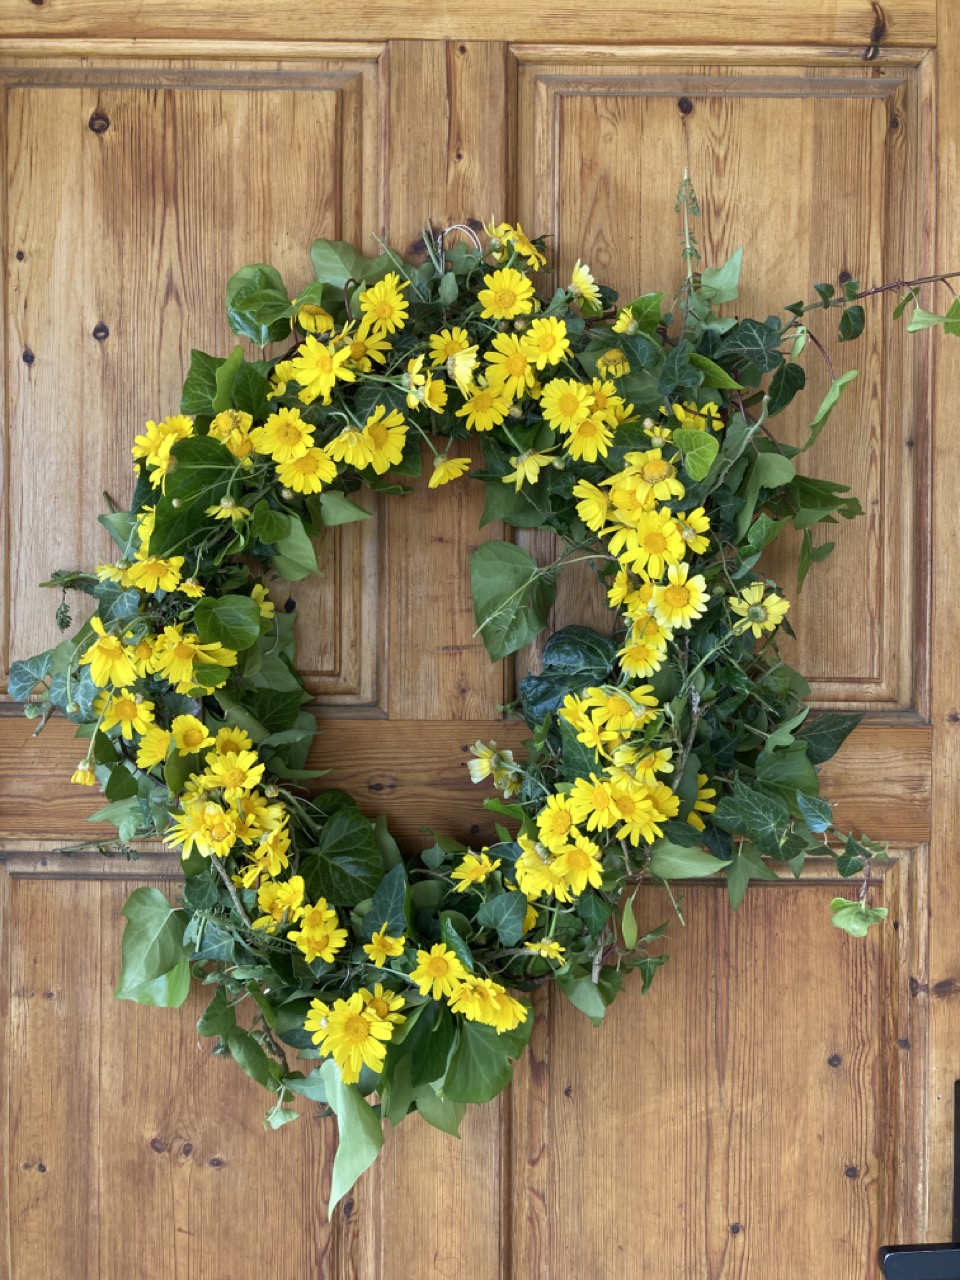 How to make a flower wreath